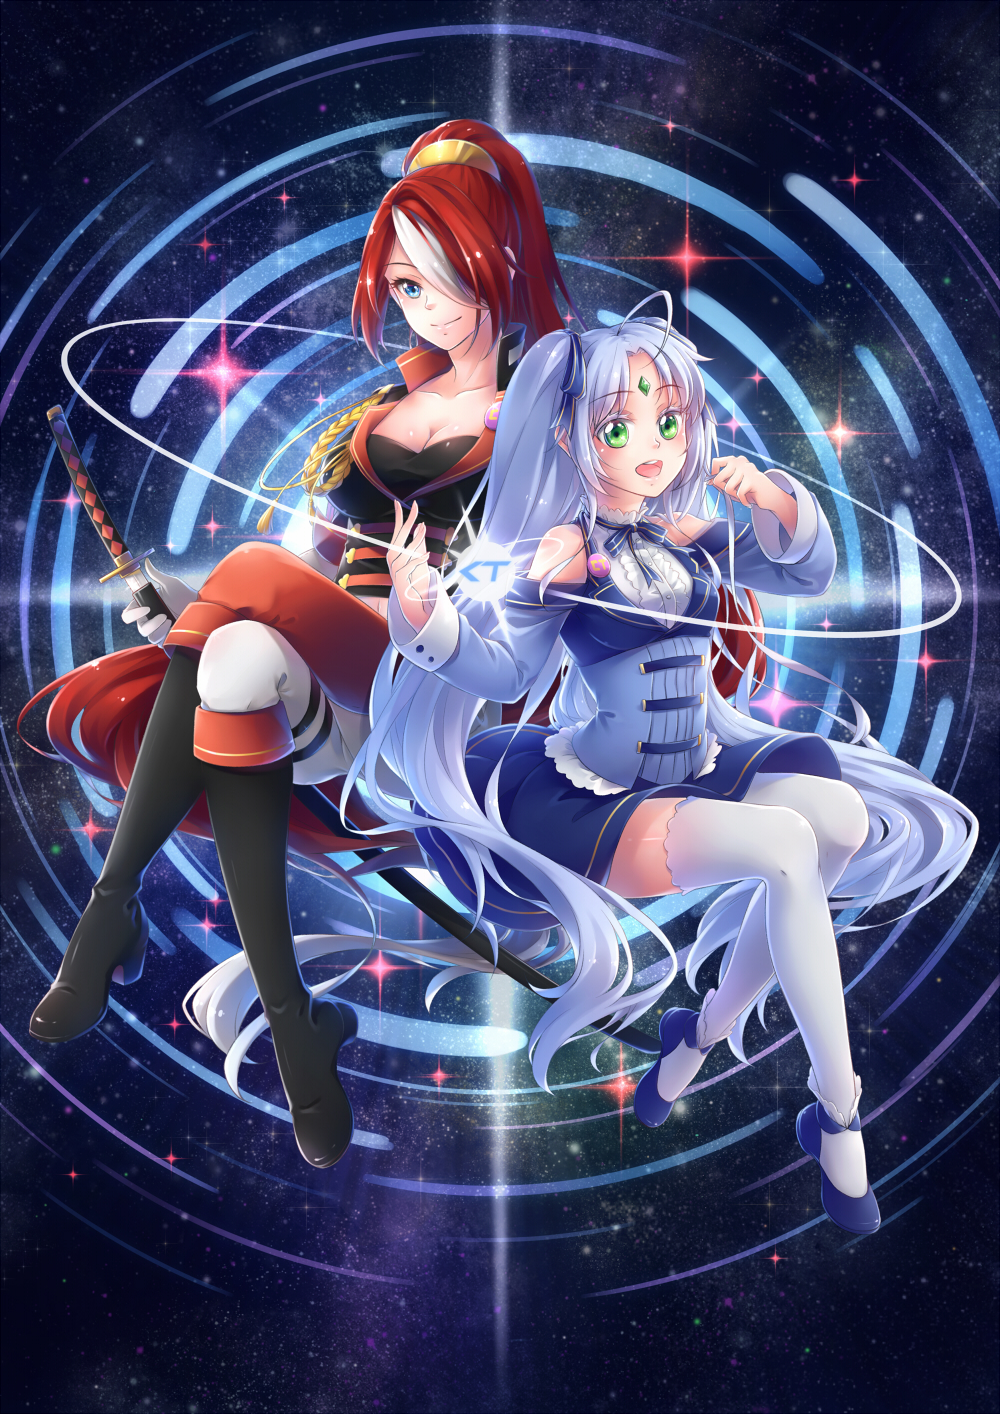 2girls ahoge black_boots blue_eyes blue_skirt blush boots catbell413 closed_mouth eyebrows_visible_through_hair gloves green_eyes hair_over_one_eye high_heel_boots high_heels highres holding holding_sword holding_weapon knee_boots legs_crossed long_hair looking_at_viewer multiple_girls open_mouth original ponytail redhead skirt smile sword thigh-highs weapon white_gloves white_hair white_legwear